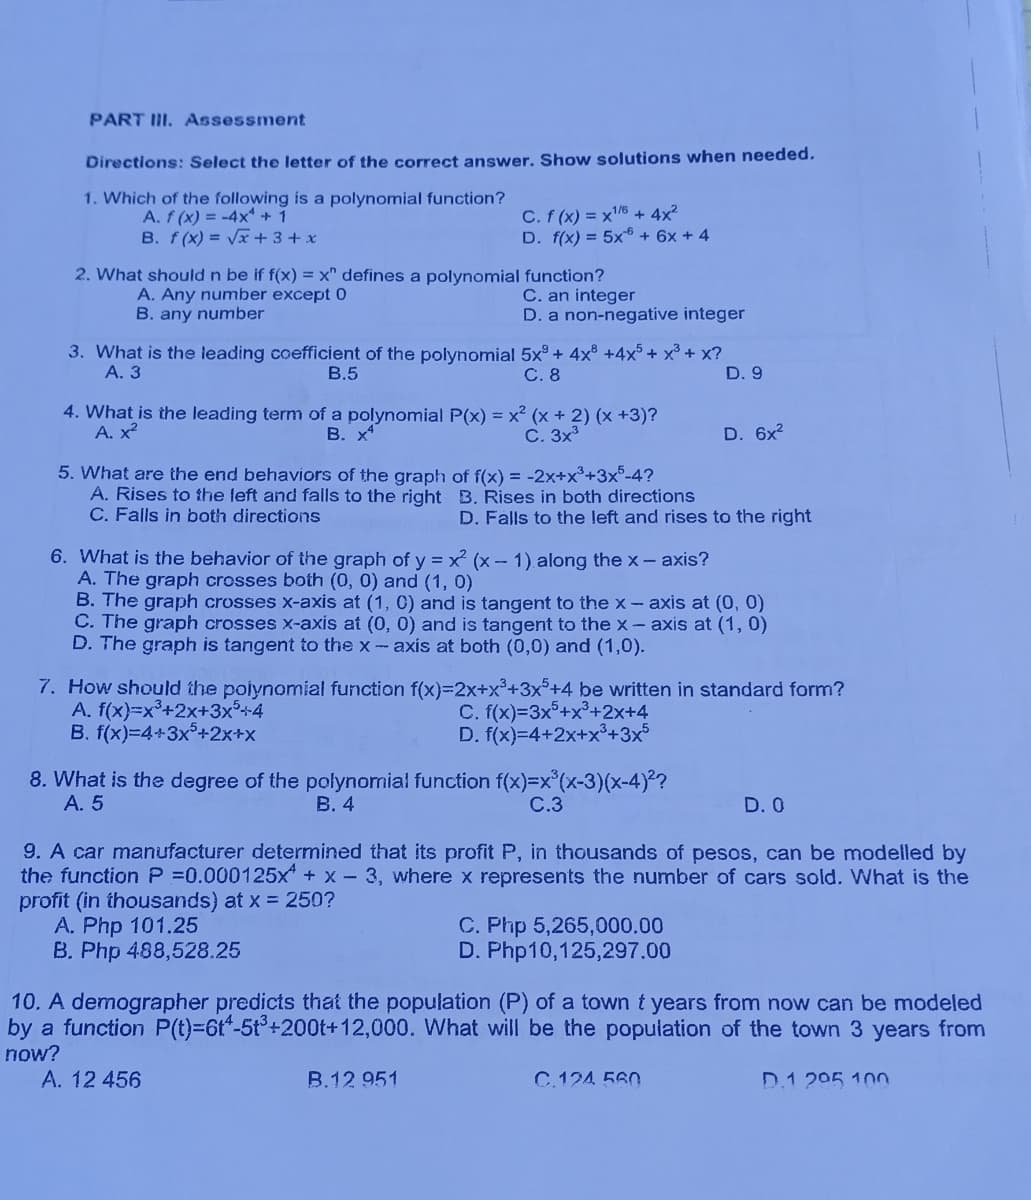 PART III. Assessment
Directions: Select the letter of the correct answer. Show solutions when needed.
1. Which of the following is a polynomial function?
A. f (x) = -4x +1
B. f (x) = Vx + 3 + x
C. f (x) = x6 + 4x²
D. f(x) = 5x + 6x + 4
2. What should n be if f(x) = x" defines a polynomial function?
A. Any number except 0
B. any number
C. an integer
D. a non-negative integer
3. What is the leading coefficient of the polynomial 5x° + 4x +4x5+ x³ + x?
А. 3
В.5
С.8
D. 9
4. What is the leading term of a polynomial P(x) = x² (x + 2) (x +3)?
А. х2
В. х
С. 3х3
D. 6x2
5. What are the end behaviors of the graph of f(x) = -2x+x°+3x°-4?
A. Rises to the left and falls to the right B. Rises in both directions
C. Falls in both directions
D. Falls to the left and rises to the right
6. What is the behavior of the graph of y = x (x- 1) along the x- axis?
A. The graph crosses both (0, 0) and (1, 0)
B. The graph crosses x-axis at (1, 0) and is tangent to the x- axis at (0, 0)
C. The graph crosses x-axis at (0, 0) and is tangent to the x- axis at (1, 0)
D. The graph is tangent to the x-axis at both (0,0) and (1,0).
7. How should the poiynomial function f(x)=2x+x³+3x°+4 be written in standard form?
A. f(x)=x°+2x+3x²+4
B. f(x)=4+3x°+2x+x
C. f(x)=3x°+x°+2x+4
D. f(x)=4+2x+x³+3x5
8. What is the degree of the polynornial function f(x)=x°(x-3)(x-4)²?
А. 5
В. 4
C.3
D. 0
9. A car manufacturer determined that its profit P, in thousands of pesos, can be modelled by
the function P =0.000125x + x- 3, where x represents the number of cars sold. WNhat is the
profit (in thousands) at x = 250?
A. Php 101.25
B. Php 488,528.25
C. Php 5,265,000.00
D. Php10,125,297.00
10. A demographer predicts that the population (P) of a town t years from now can be modeled
by a function P(t)=6t"-5t°+200t+12,000. What will be the population of the town 3 years from
now?
A. 12 456
B.12 951
C.124 560
D.1 205 100
